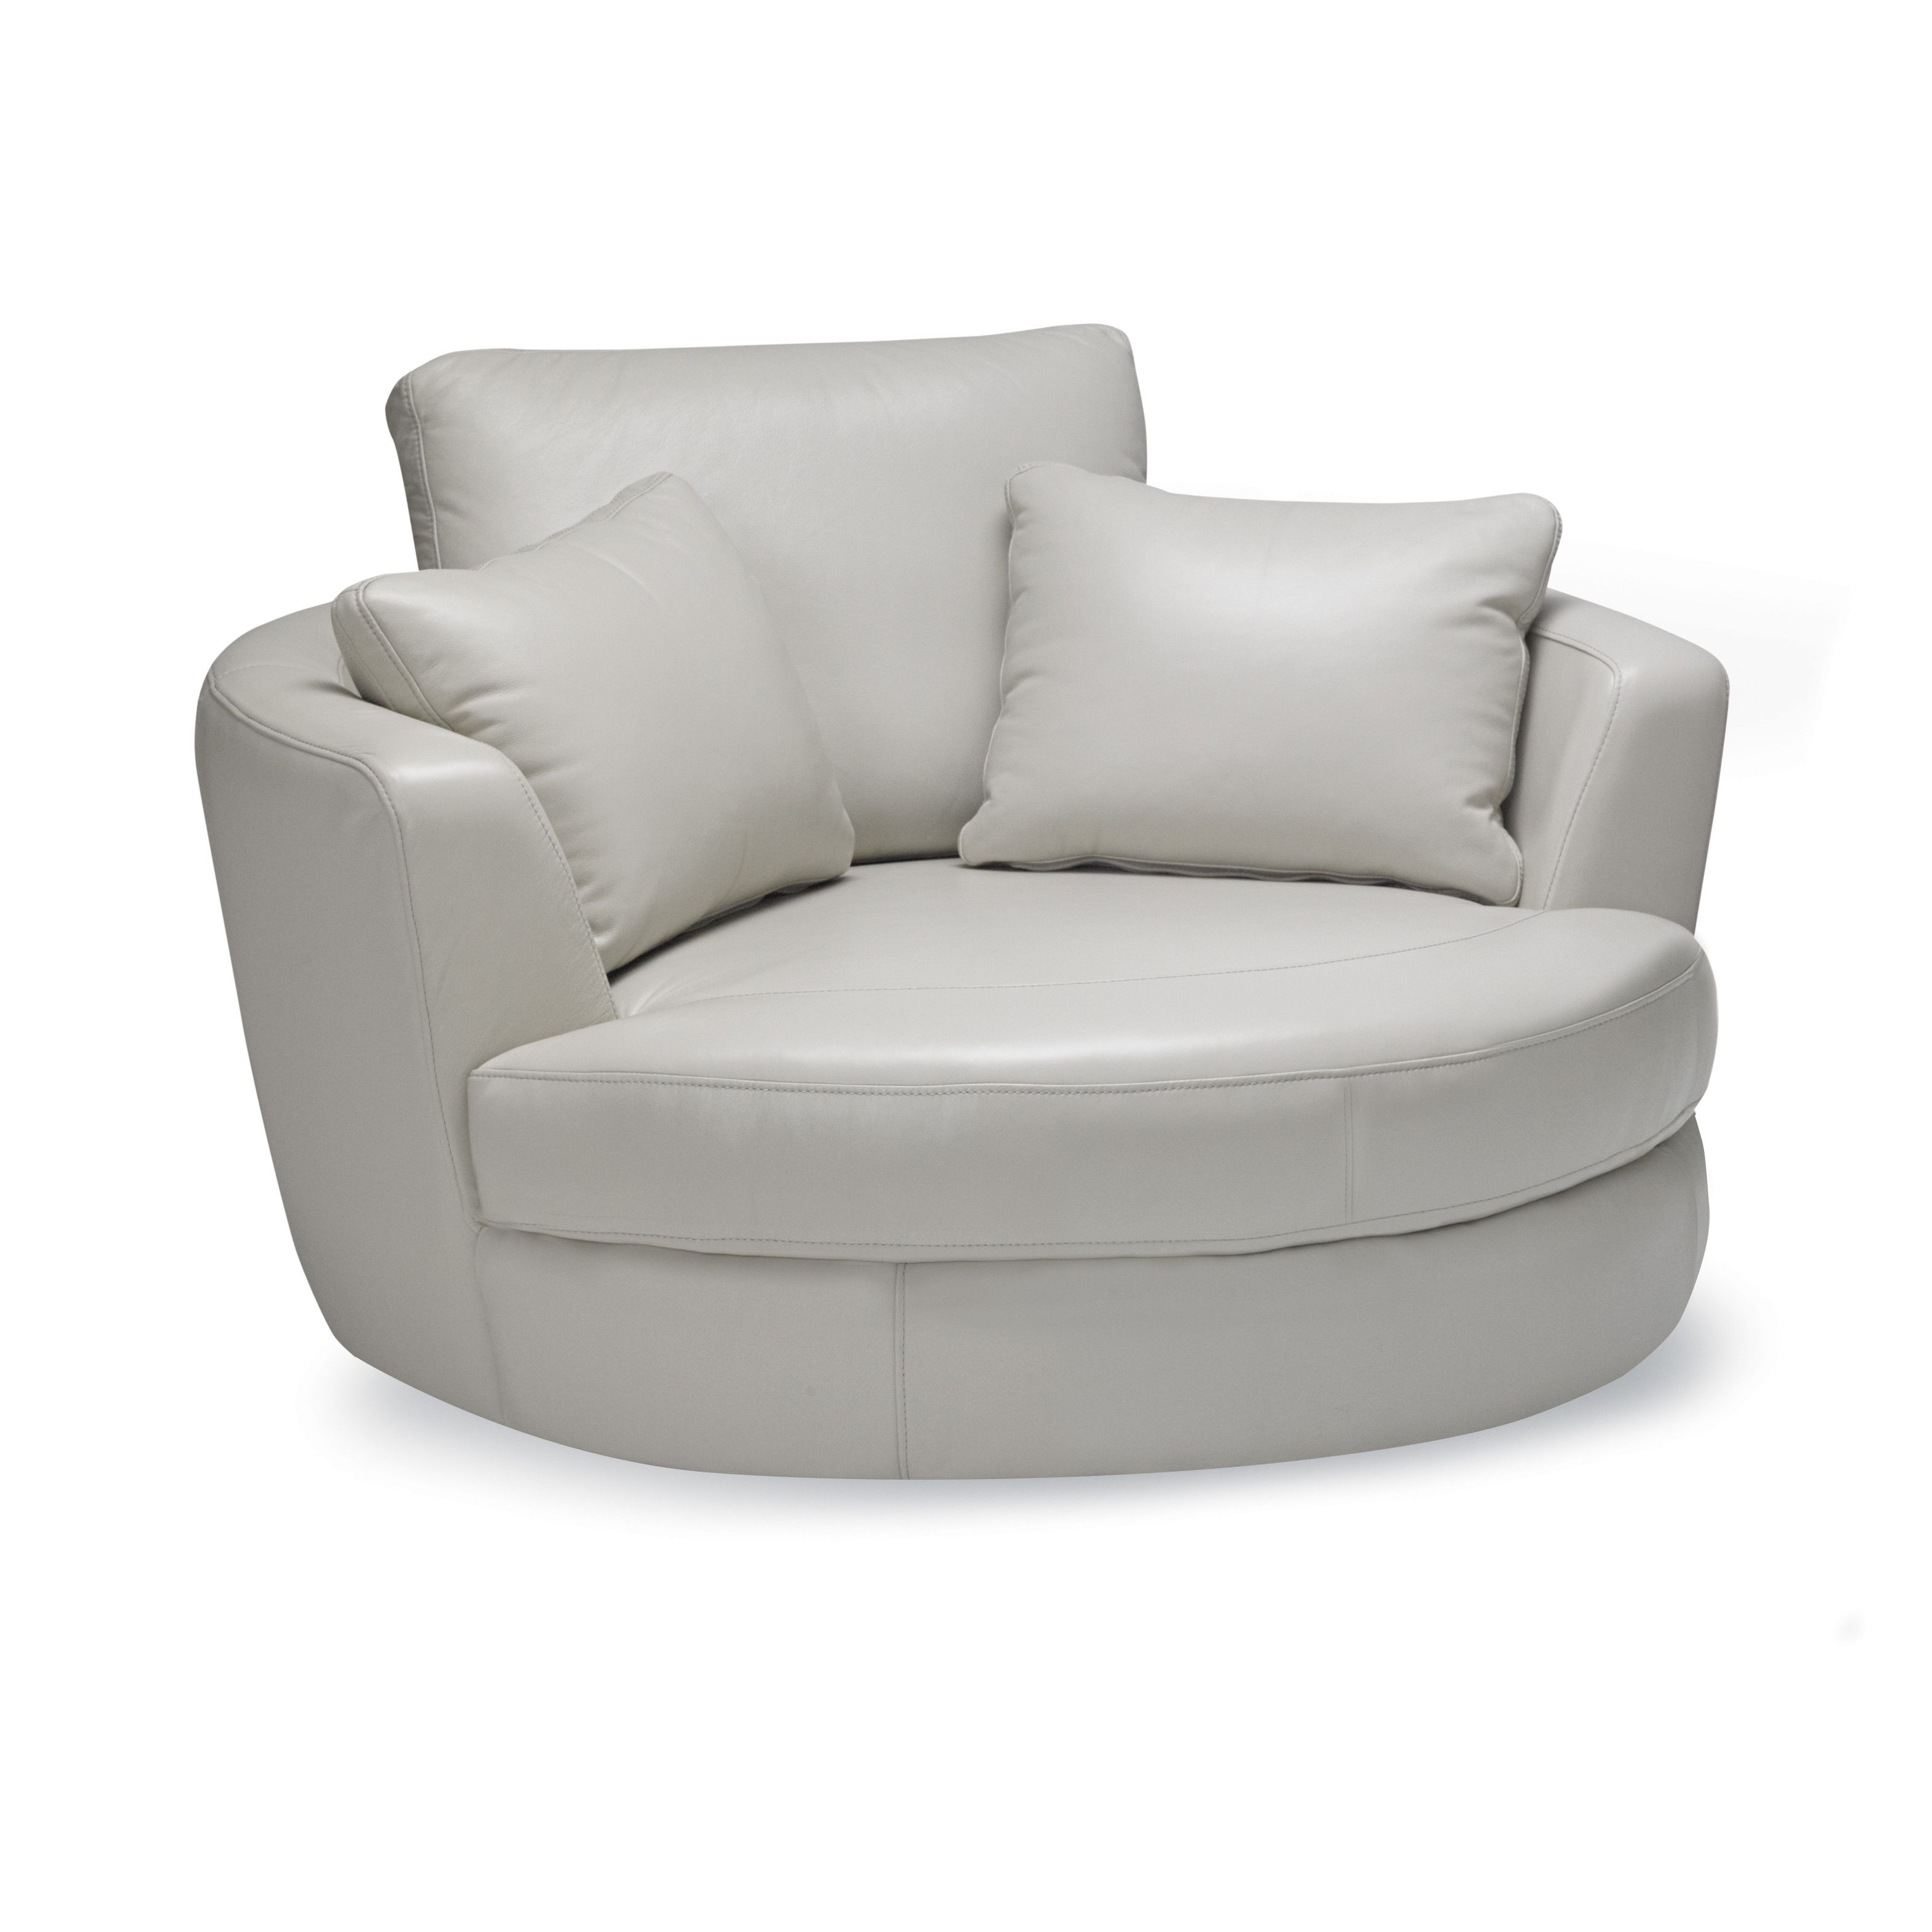 Large Round Cuddler Swivel Chair Home Chair Designs For Cuddler Swivel Sofa Chairs (View 5 of 15)